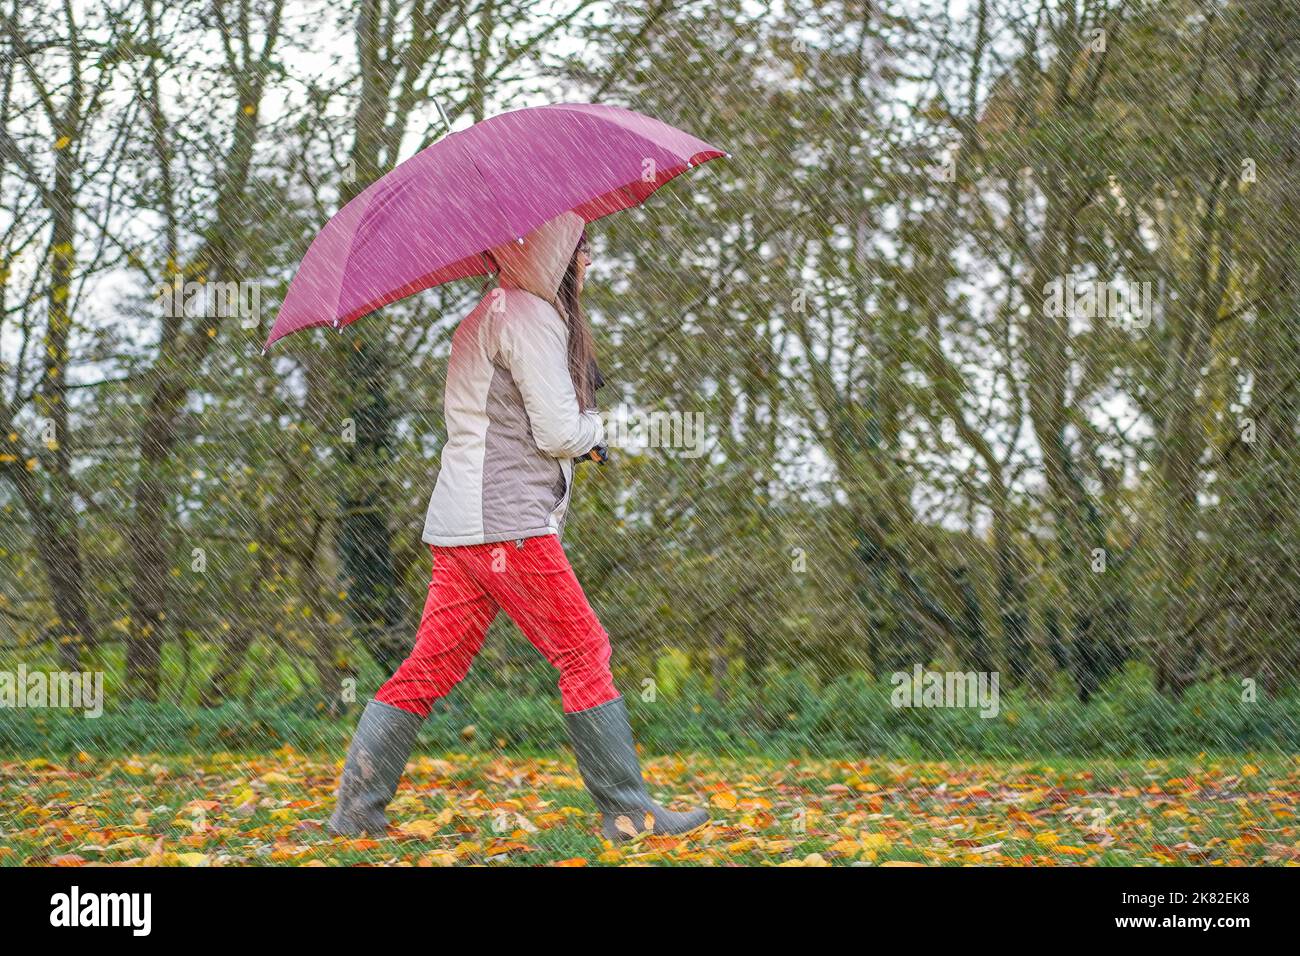 Side view of woman wearing red trousers & green wellies holding umbrella walking outdoors through autumn leaves in the pouring rain. Stock Photo